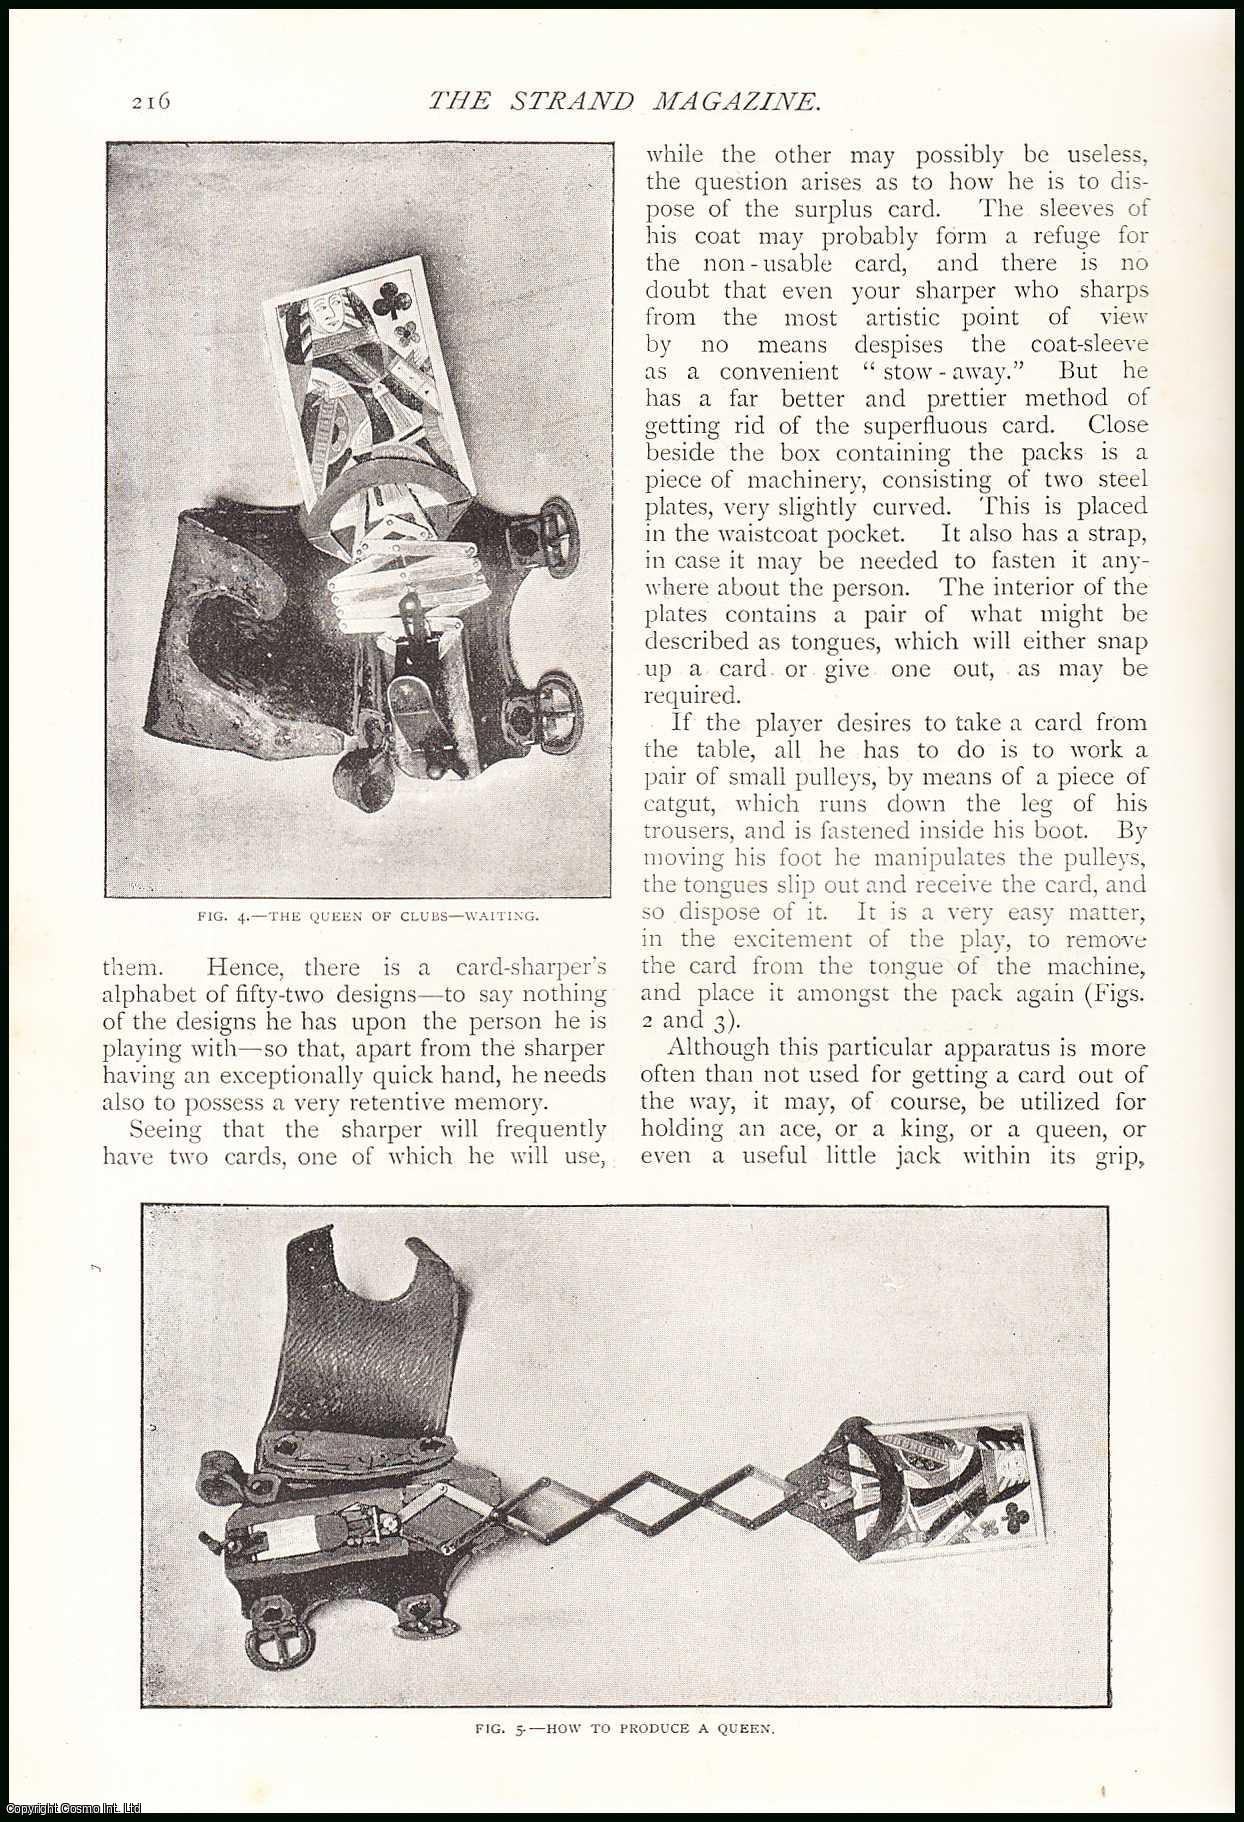 Harry How - Card-Sharpers and their Work. An uncommon original article from The Strand Magazine, 1895.